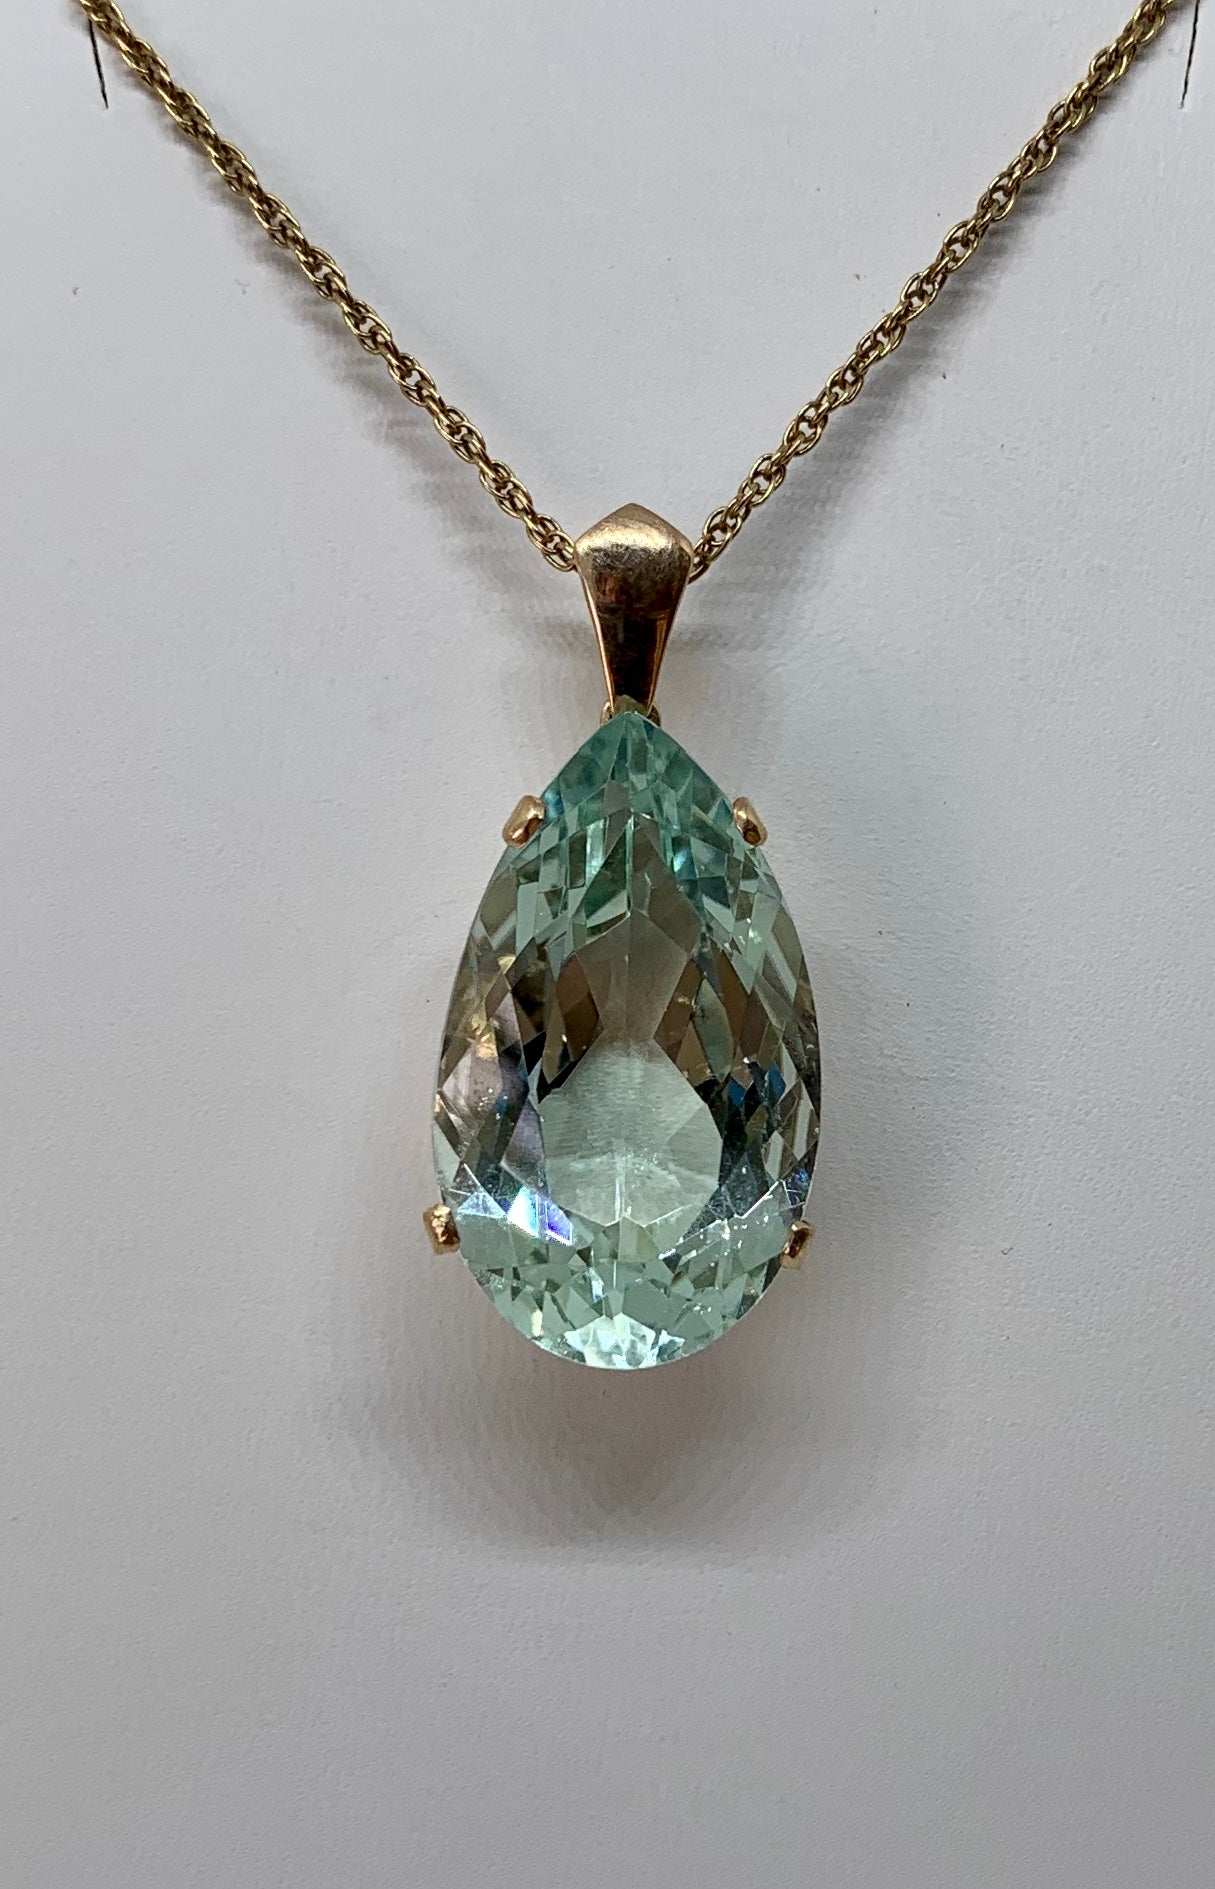 We are so delighted to have this extraordinary 27.13 Carat antique pear shape natural Aquamarine Pendant.  The magnificent aquamarine is 29mm long, over an inch, and the gem has exquisite shape, color and cut.  The radiance of the monumental aqua is